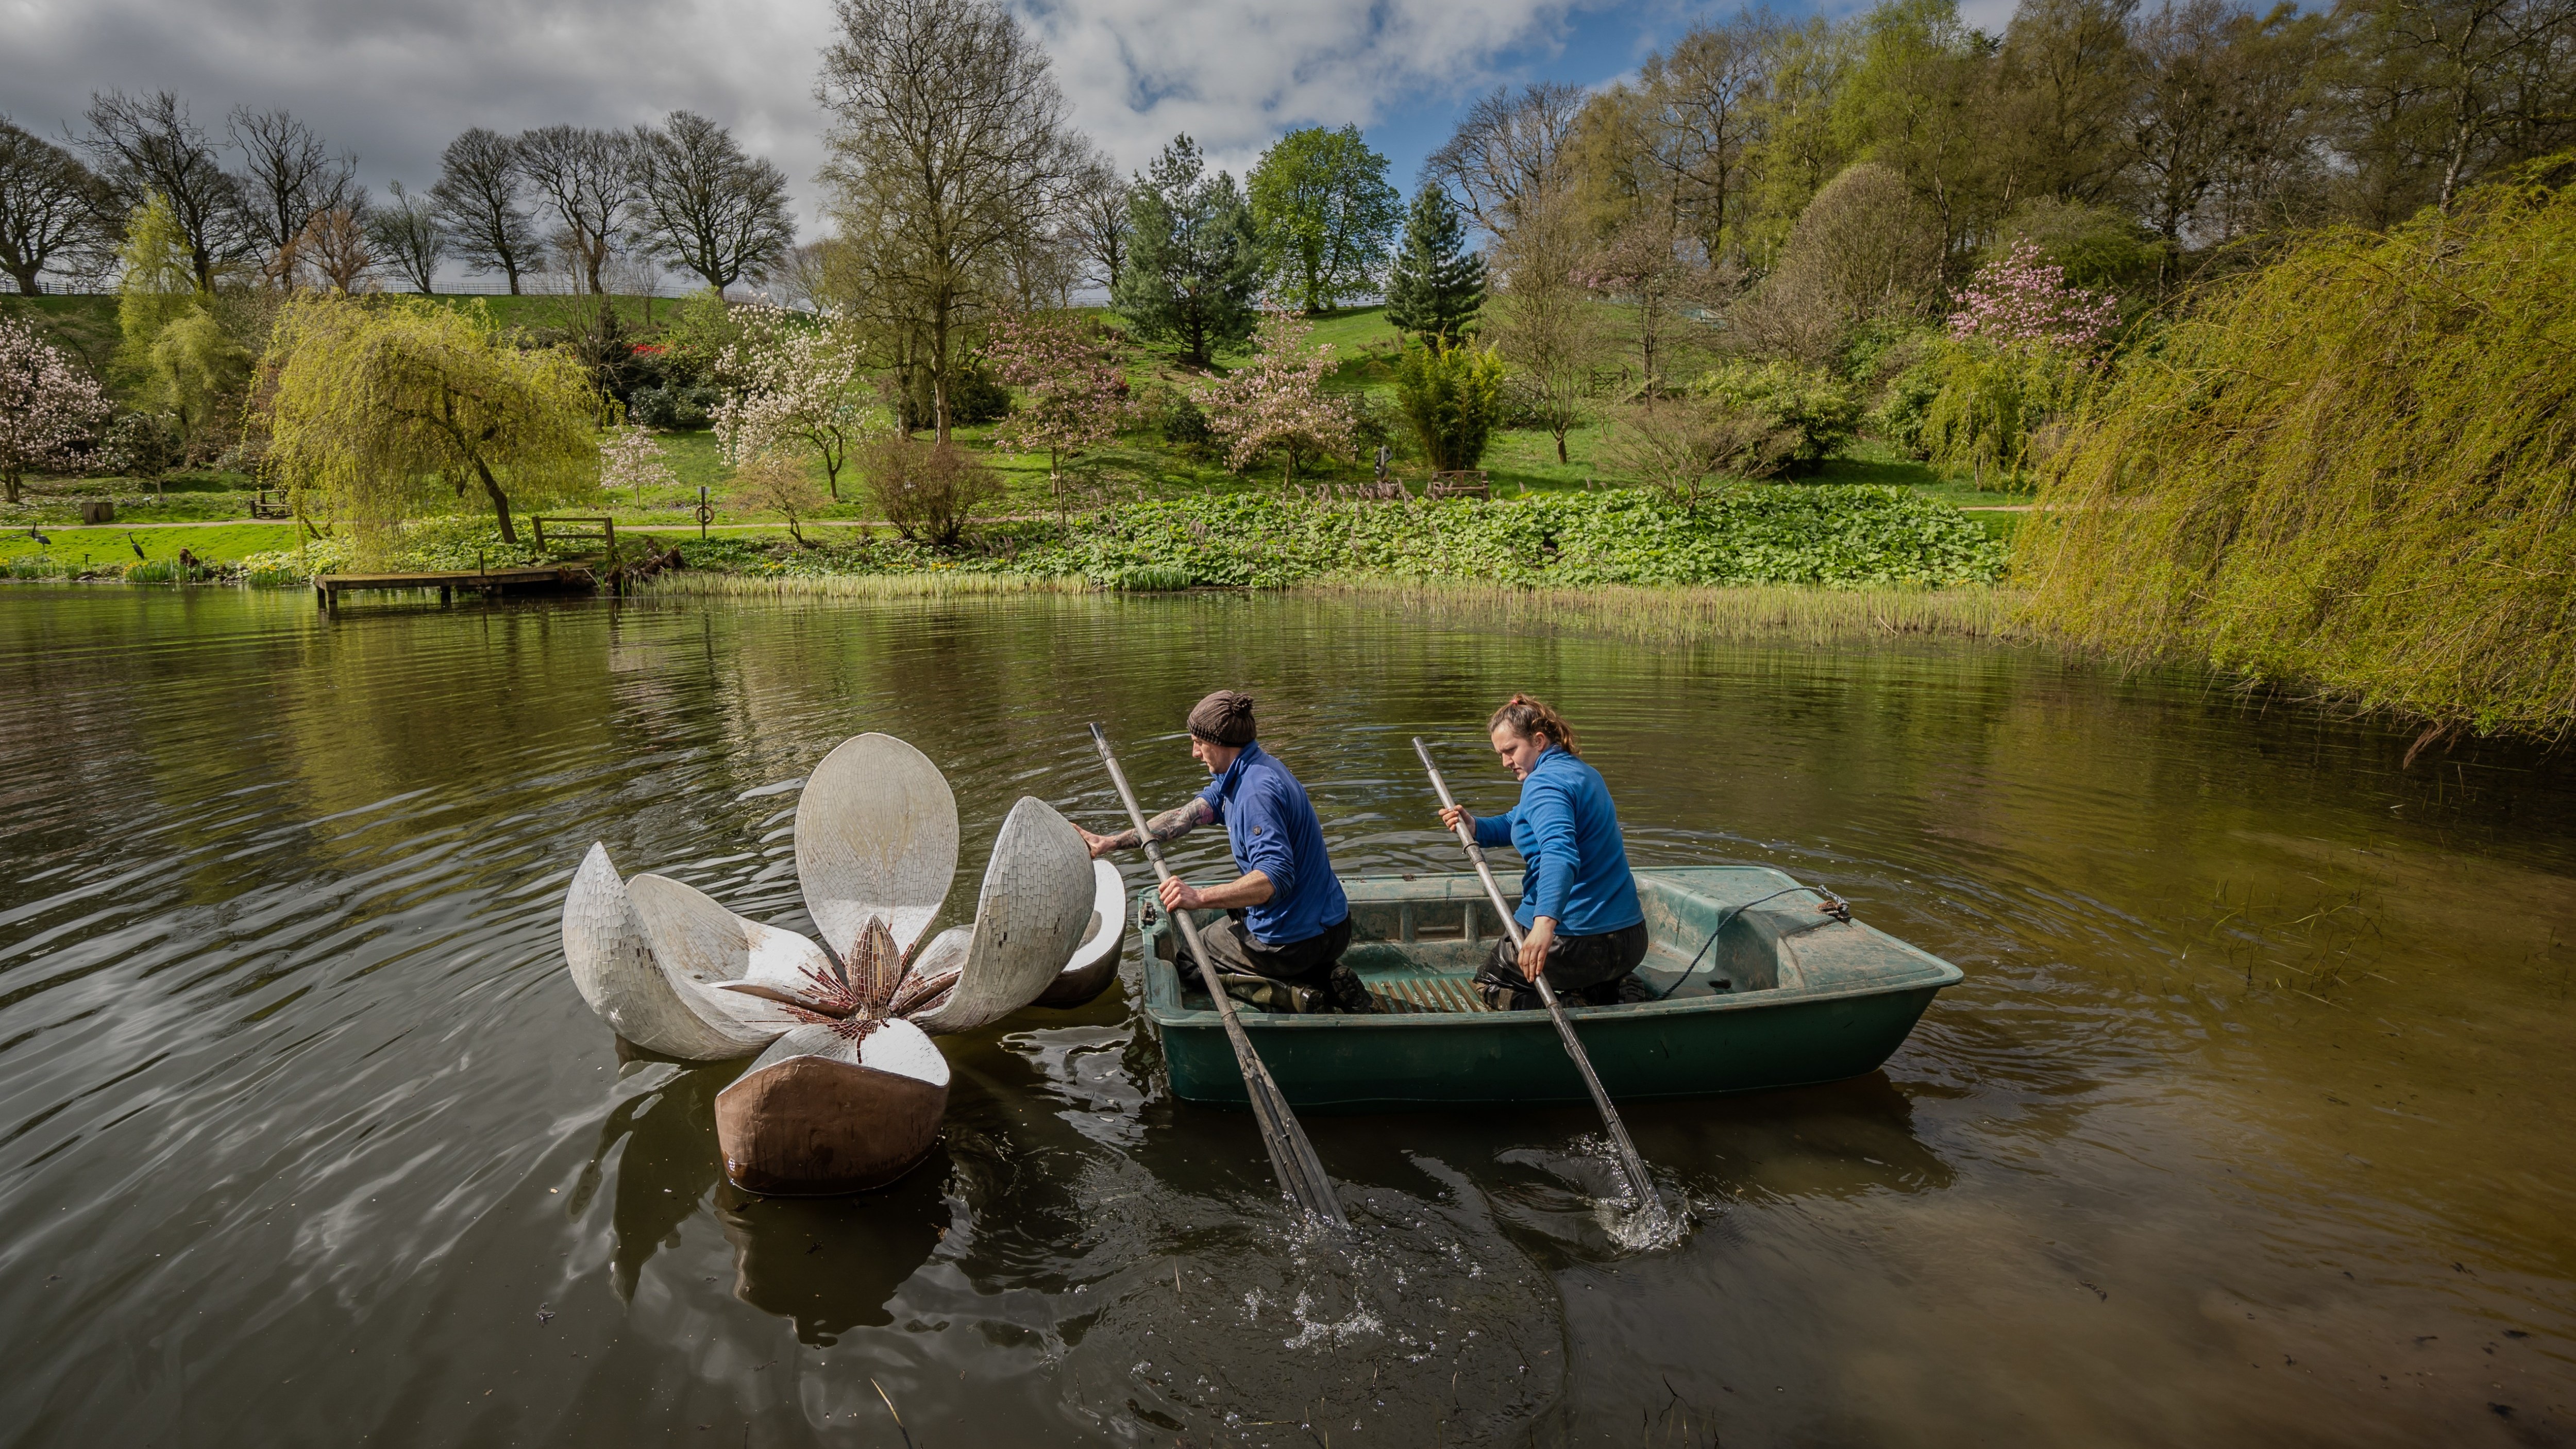 Gardeners install Magnolia, a sculpture by Rebecca Newnham, in a lake at the Himalayan Garden and Sculpture Park  near Ripon, North Yorkshire. The artwork is part of an exhibition in which 60 pieces will be dotted around the 45-acre garden